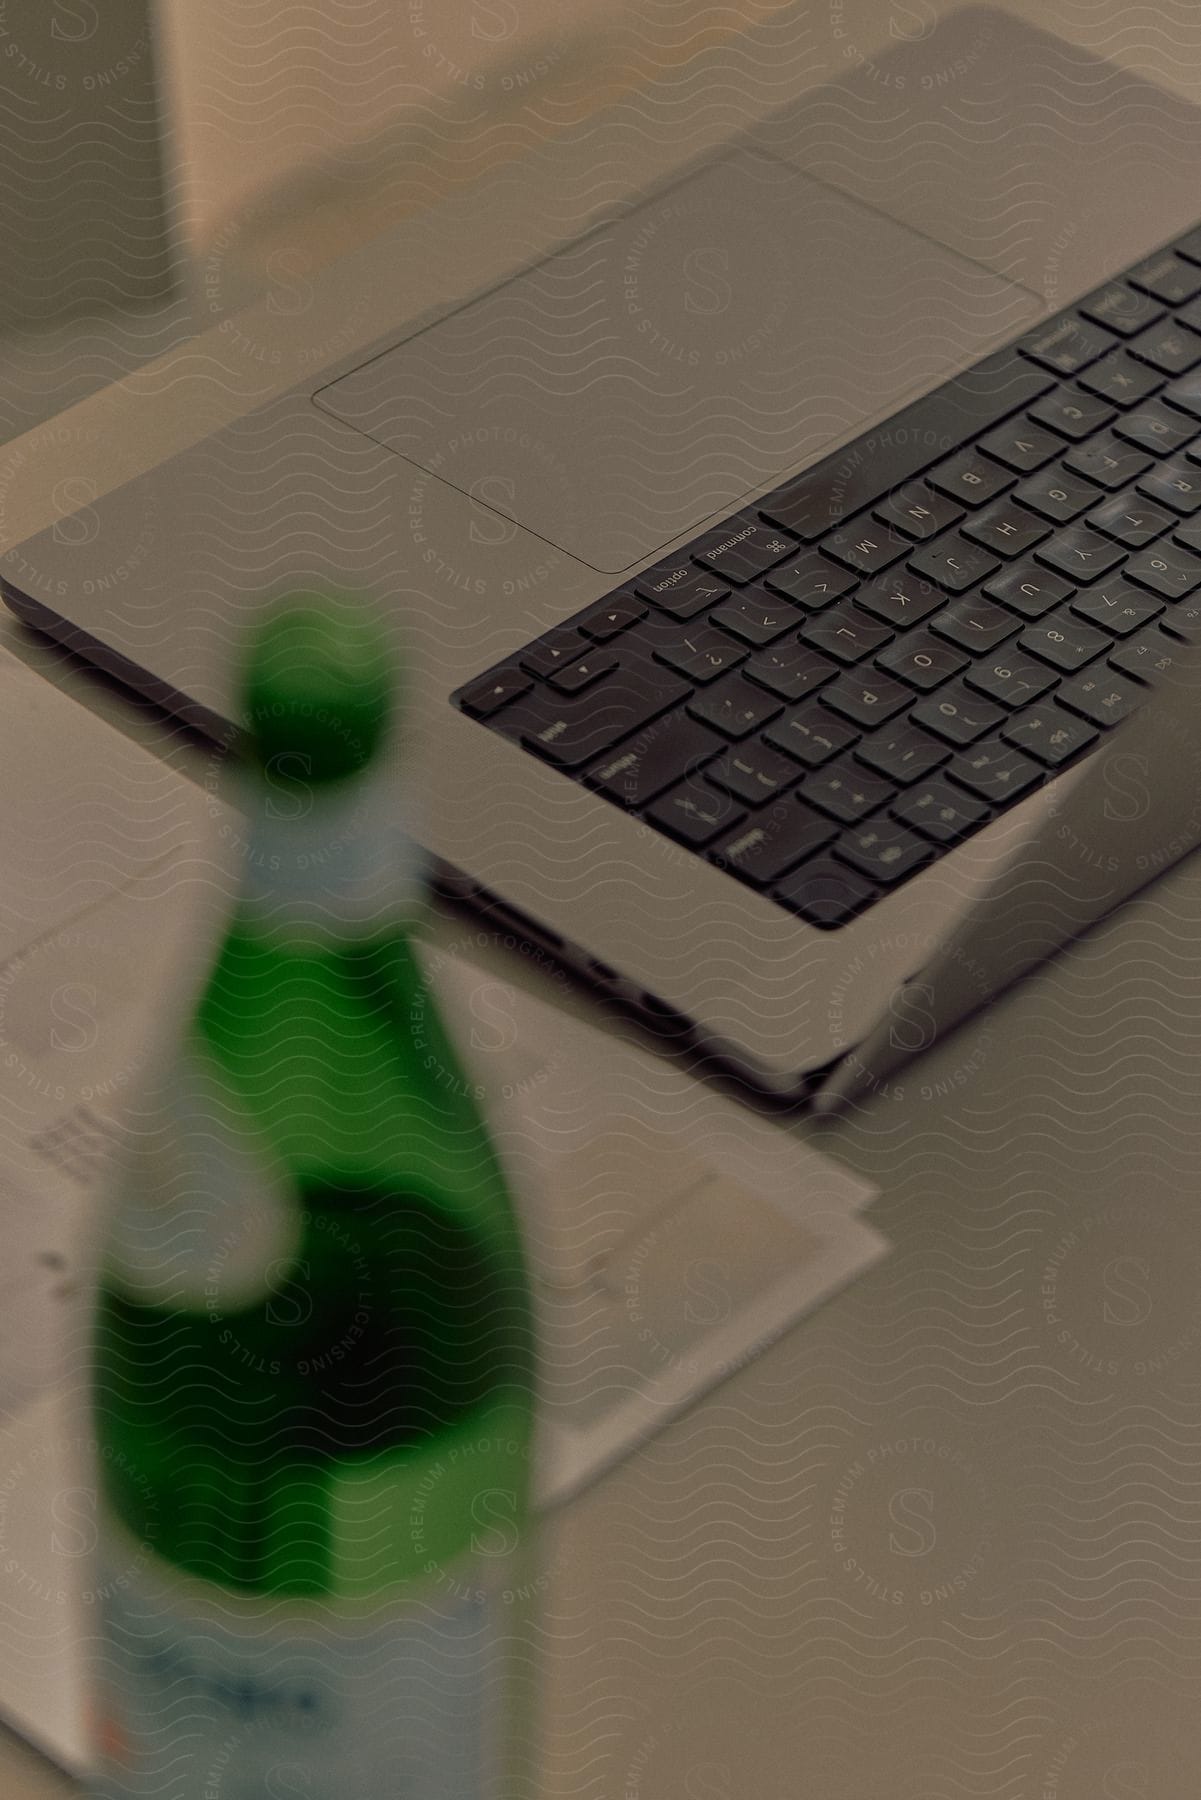 Laptop on a desk with a green glass bottle next to it.